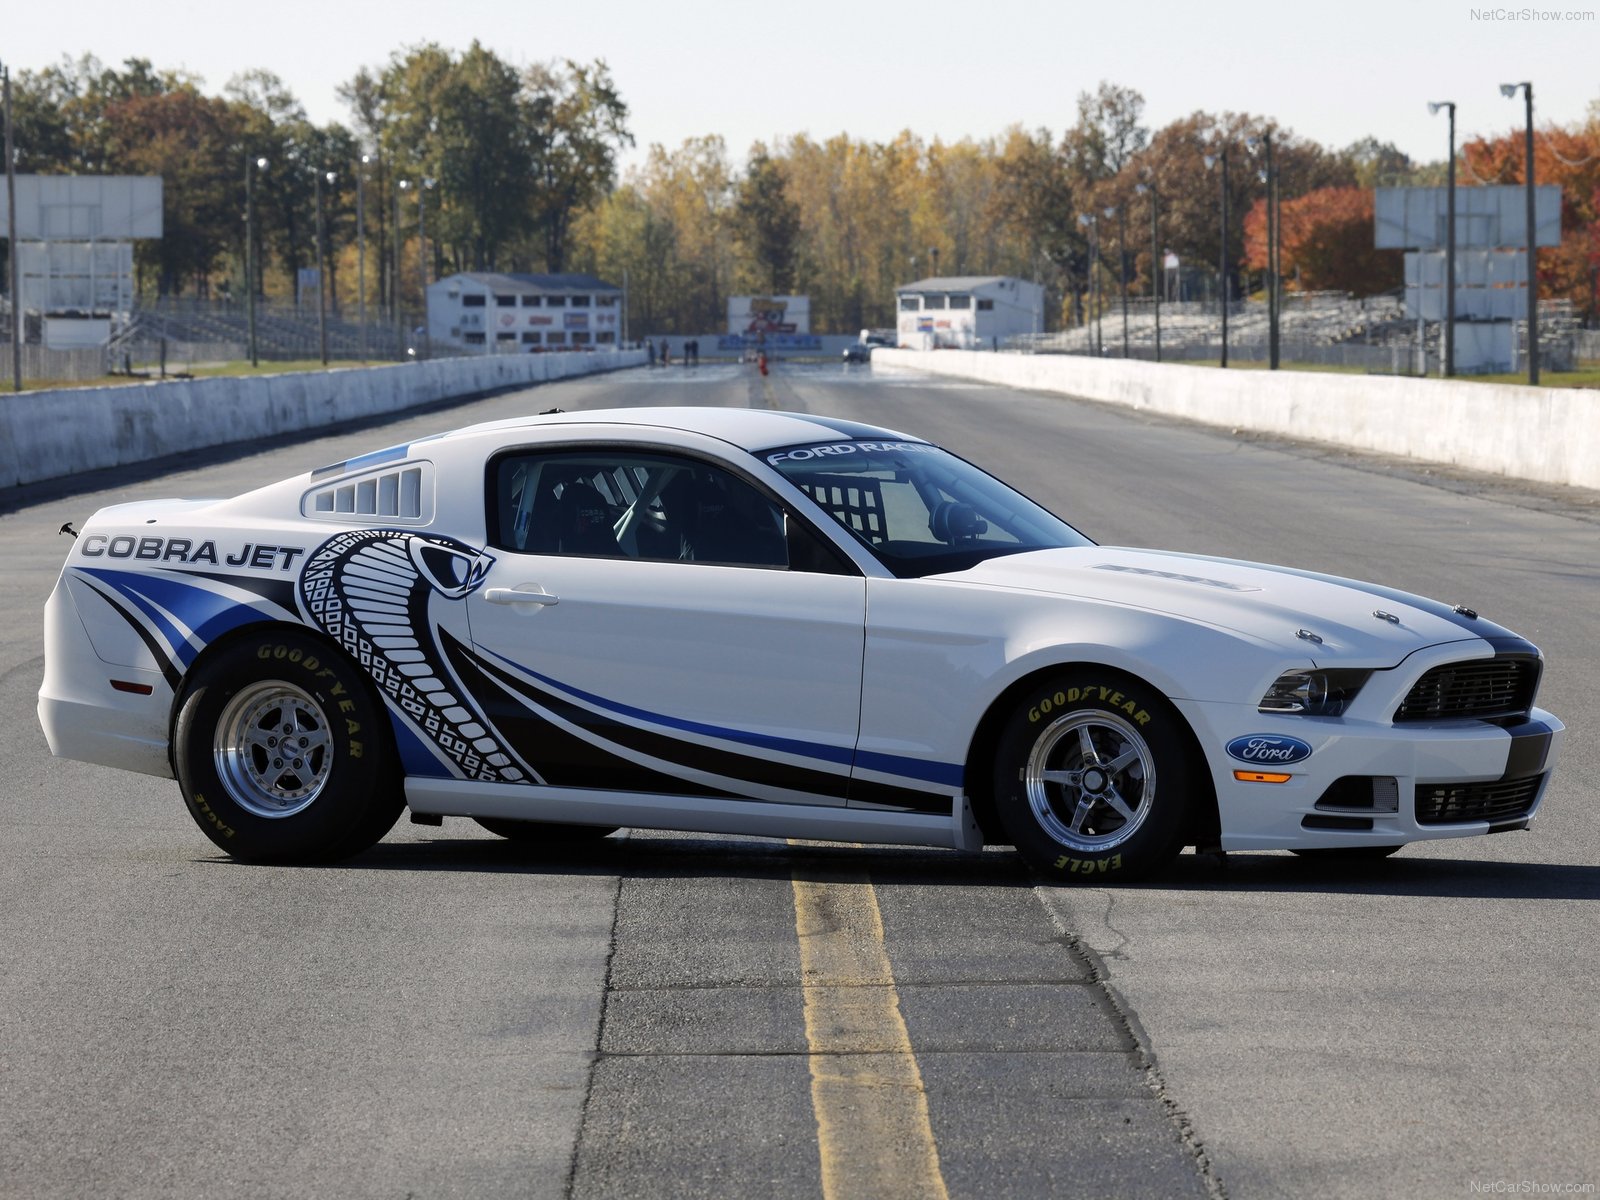 ford, Mustang, Cobra, Jet, Twin turbo, Concept, 2012 Wallpaper